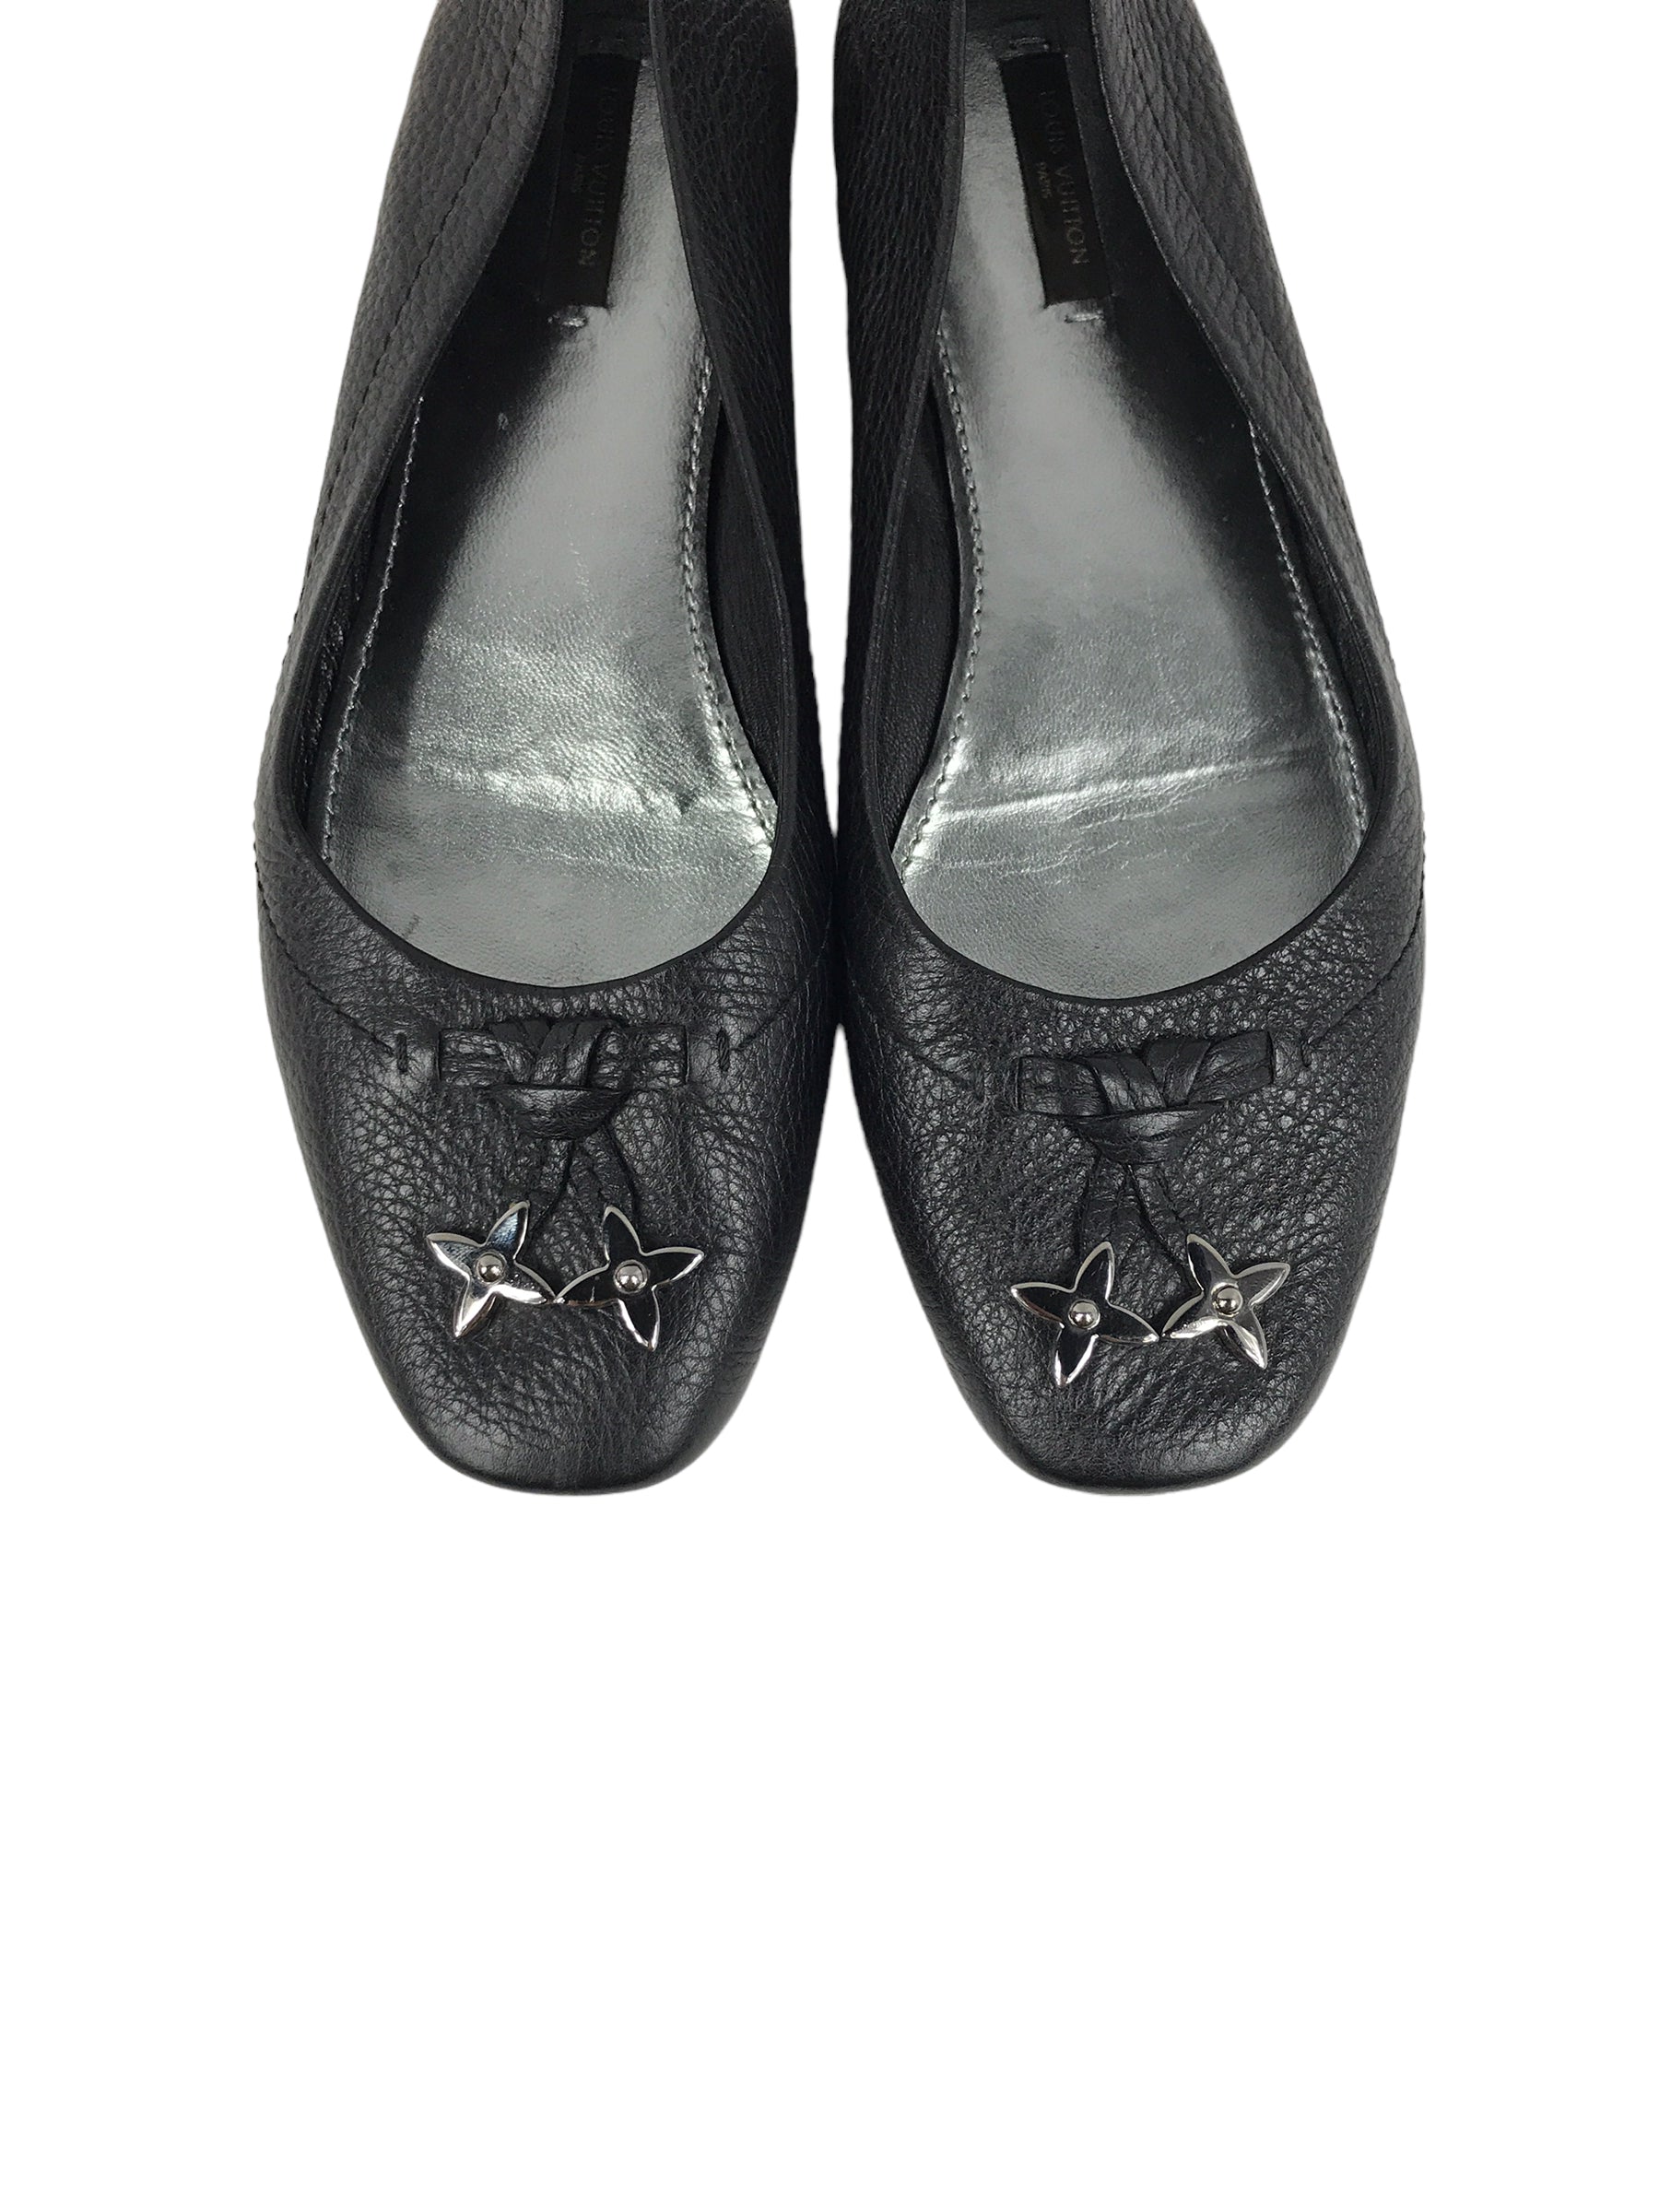 Black Grained Calfskin Leather Ballet Flats W/Floral Charms W/SHW